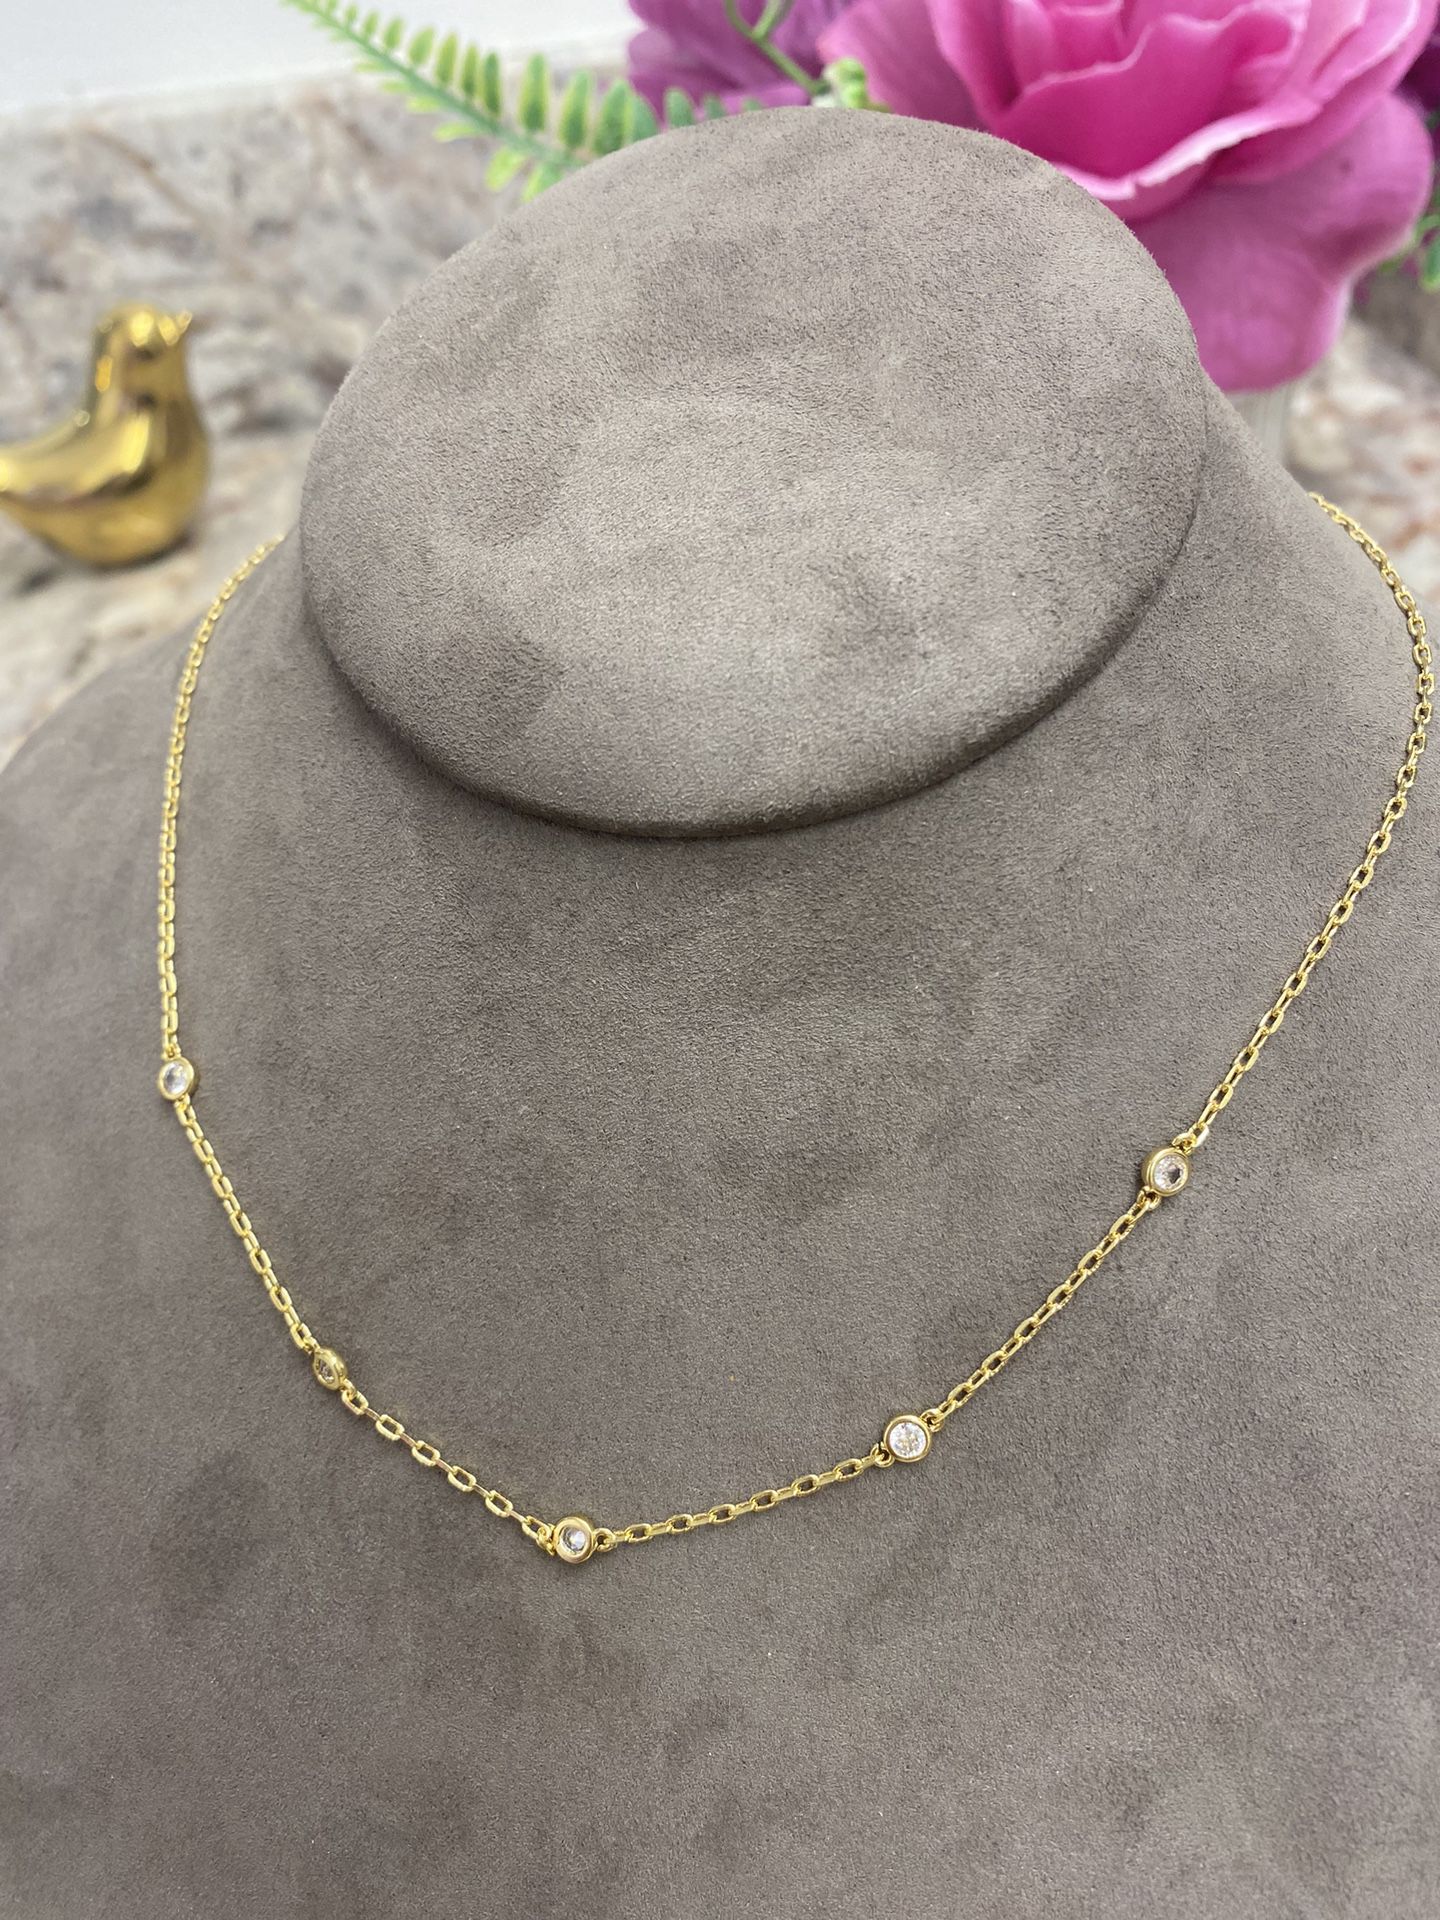 14K Gold Dipped Station Necklace Simulated Diamond Women’s CZ Chain Layering.  Length 17 - 19 inches